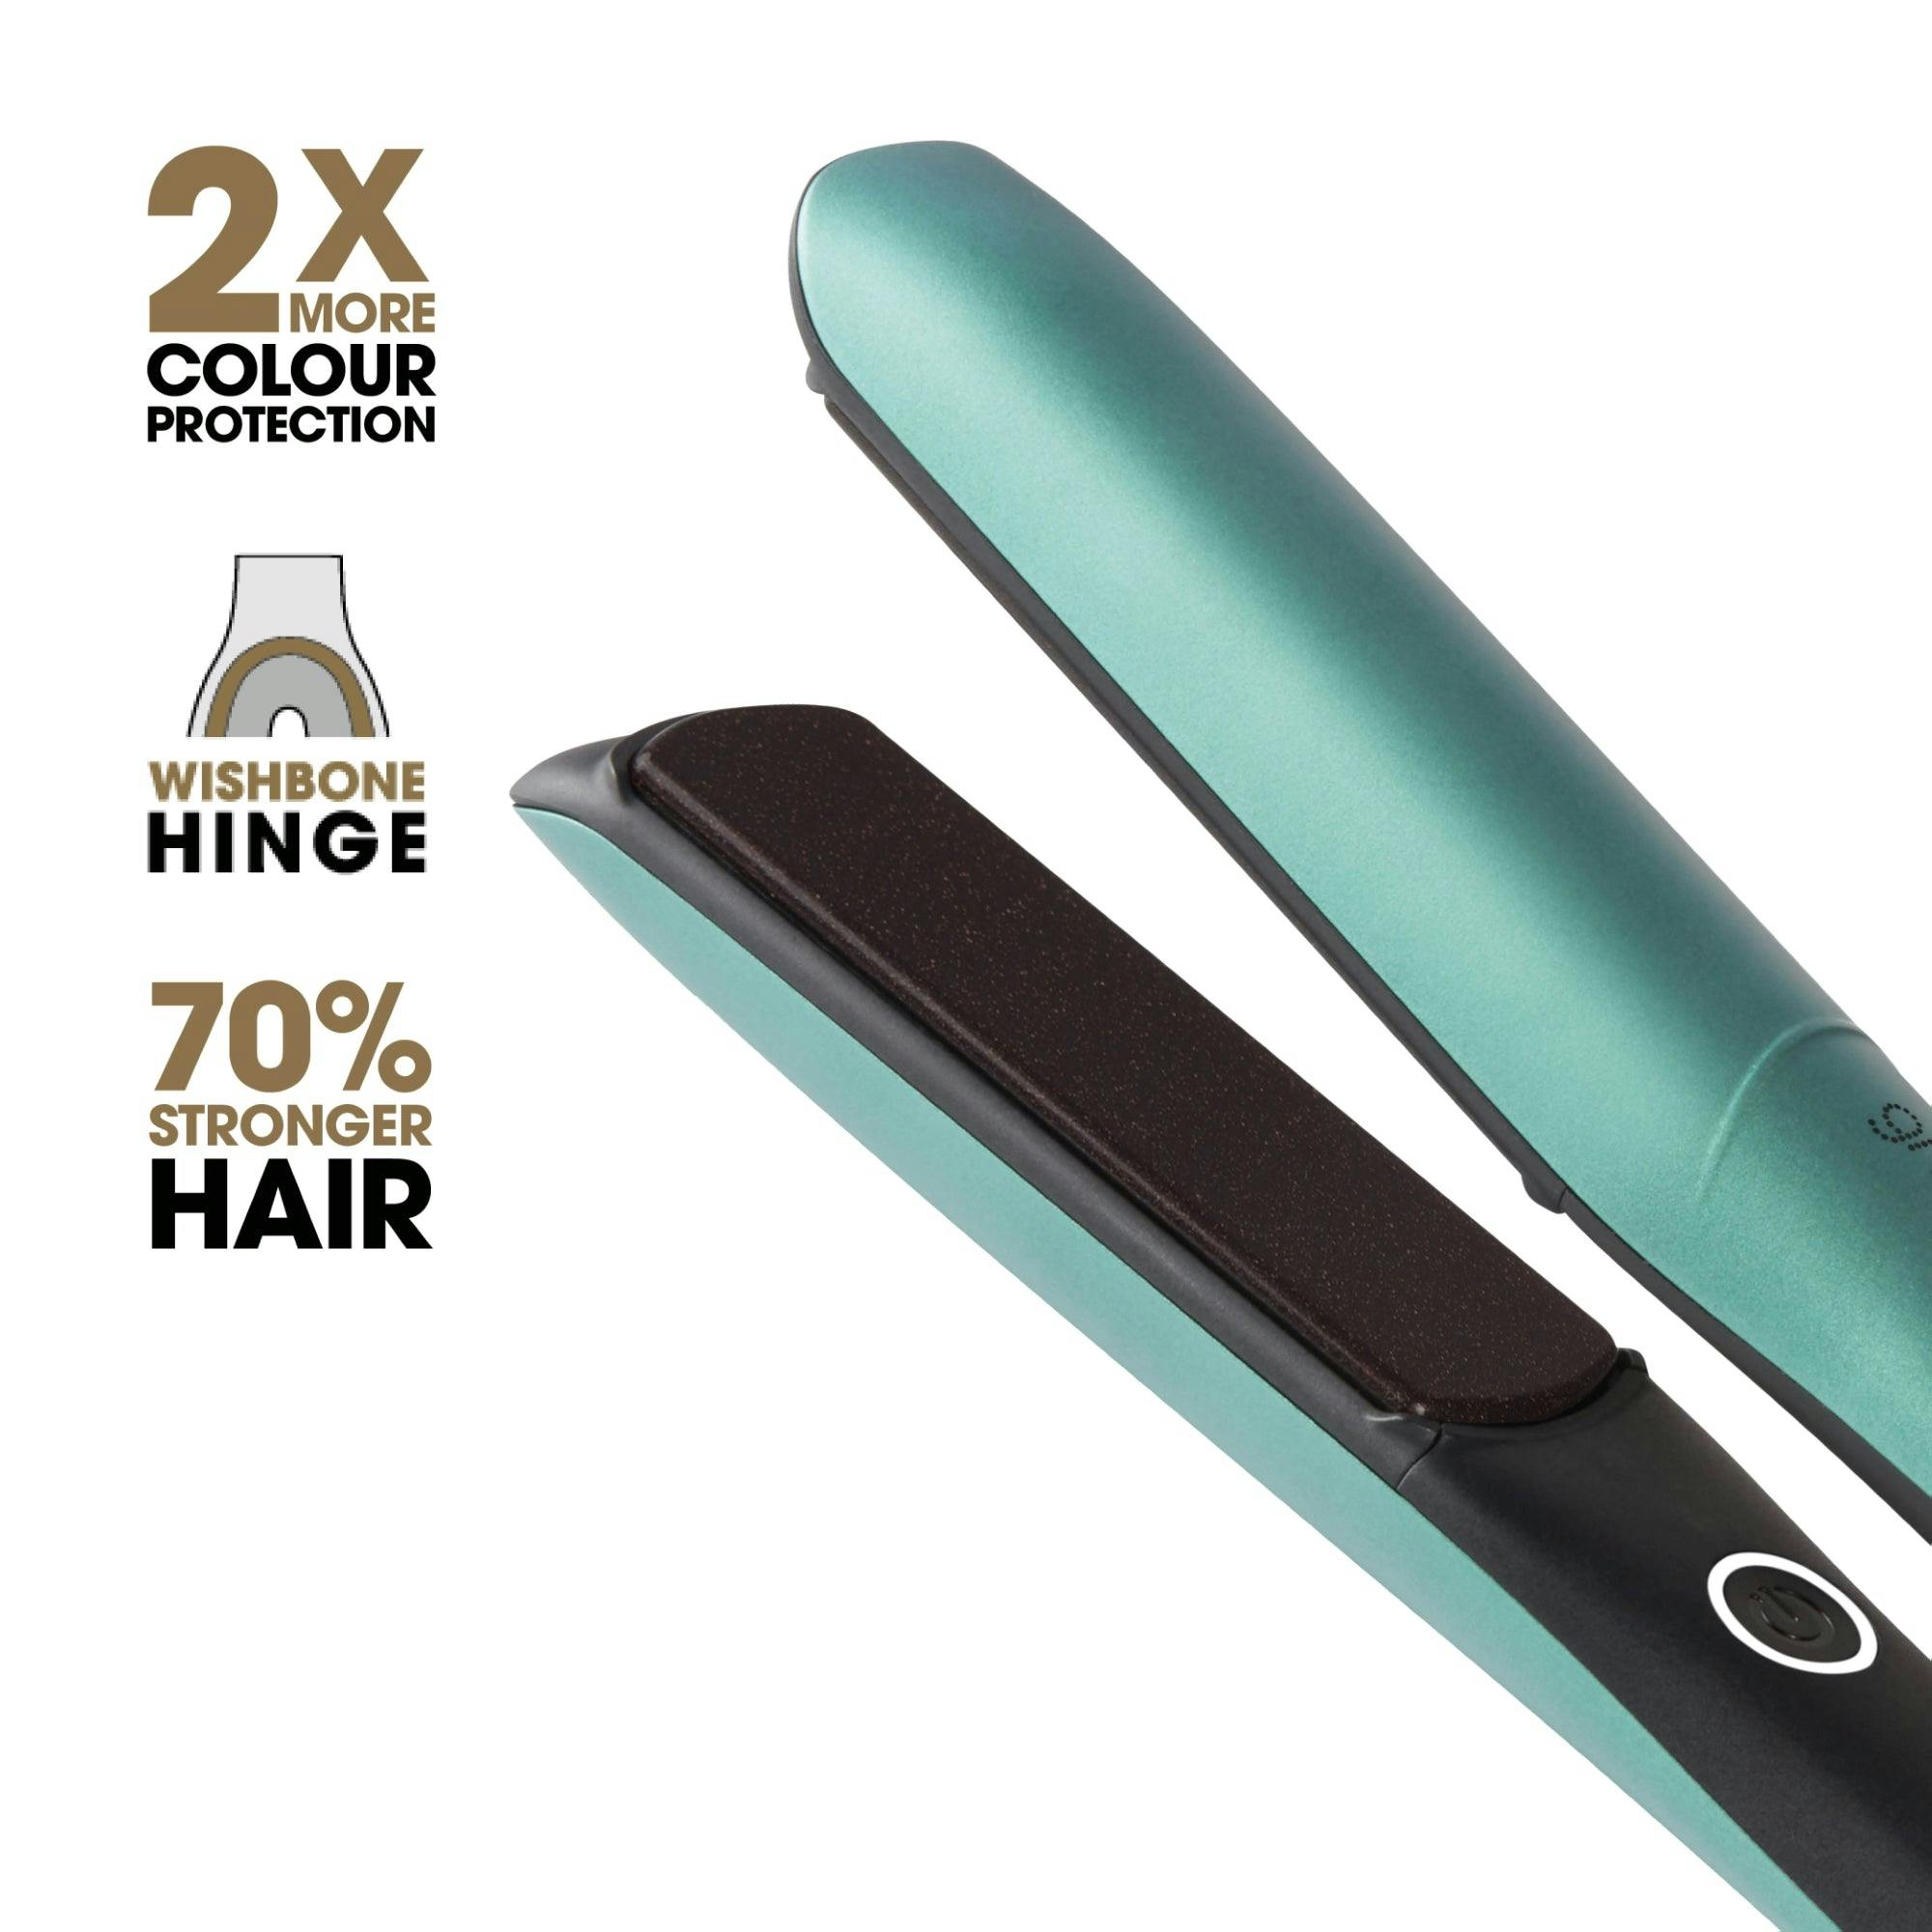 ghd Dreamland Collection Platinum+ And Helios Deluxe Gift Set In Jade Green